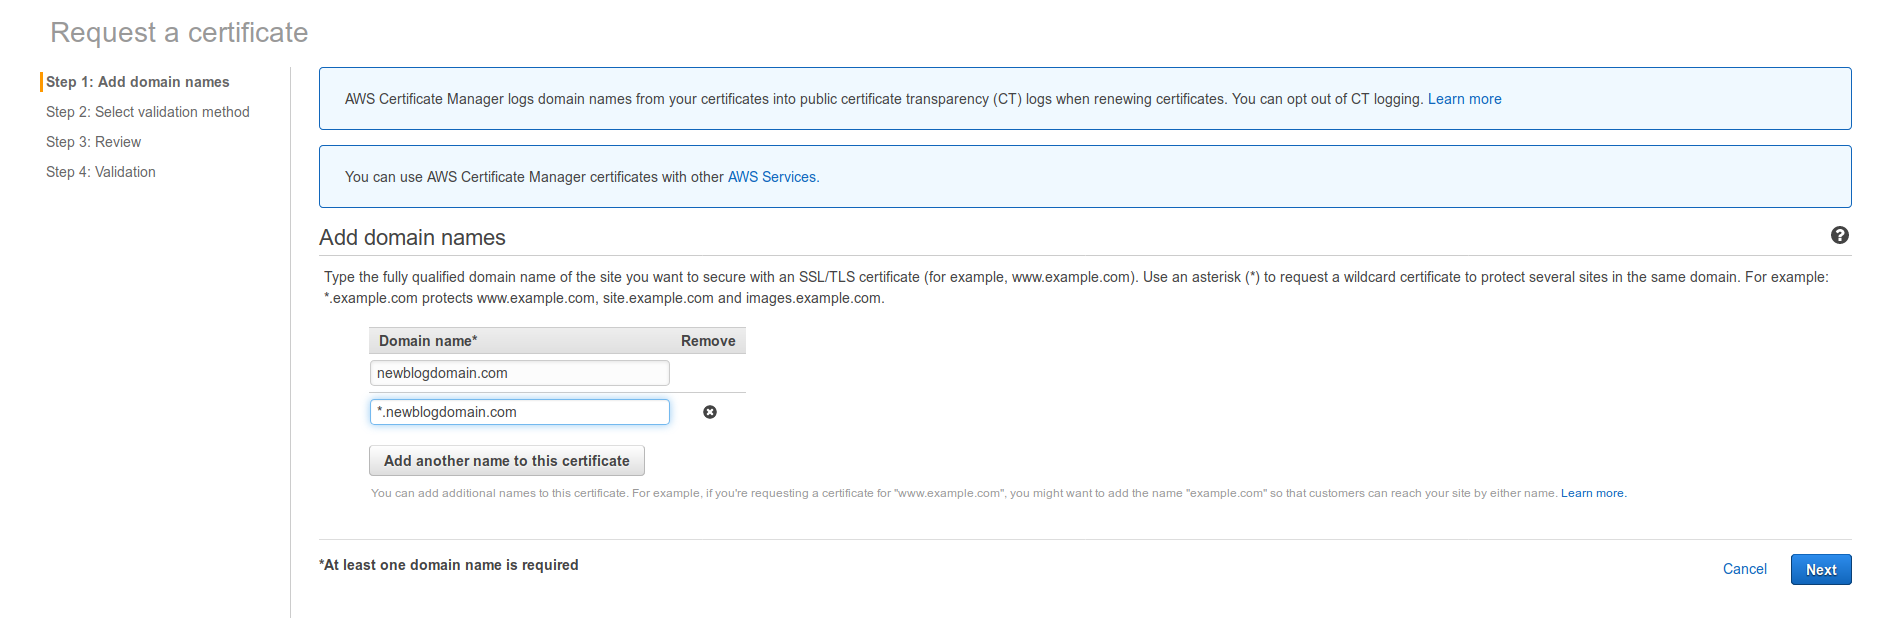 /media/aws/acm-request-certificate-add-domain-names.png